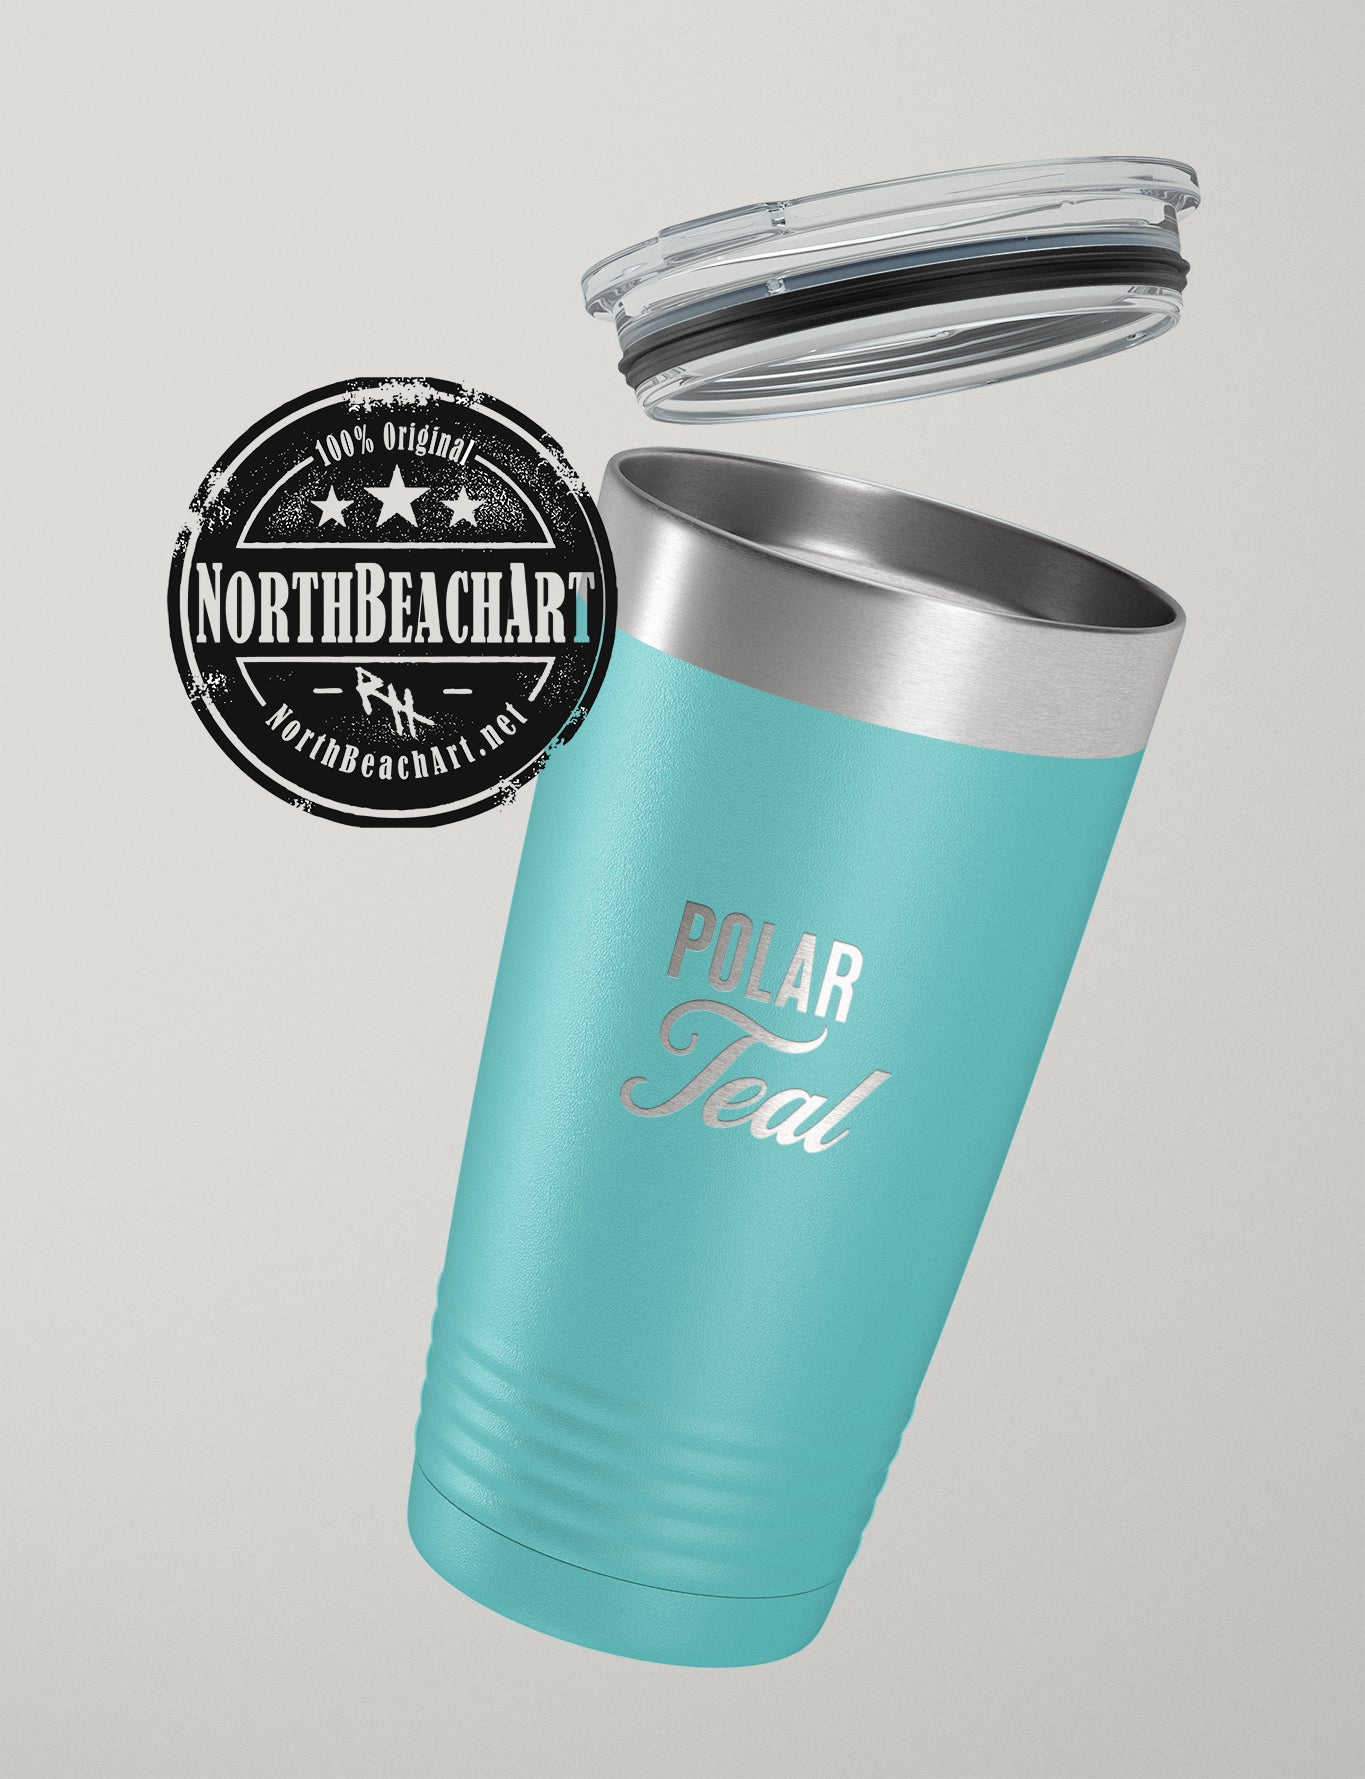 Polar Camel Insulated Mug - World's Greatest Dad - Personalized Engraved  Polar Camel YETI Clone - for the GREATEST DAD EVER! - Killorglin Creations